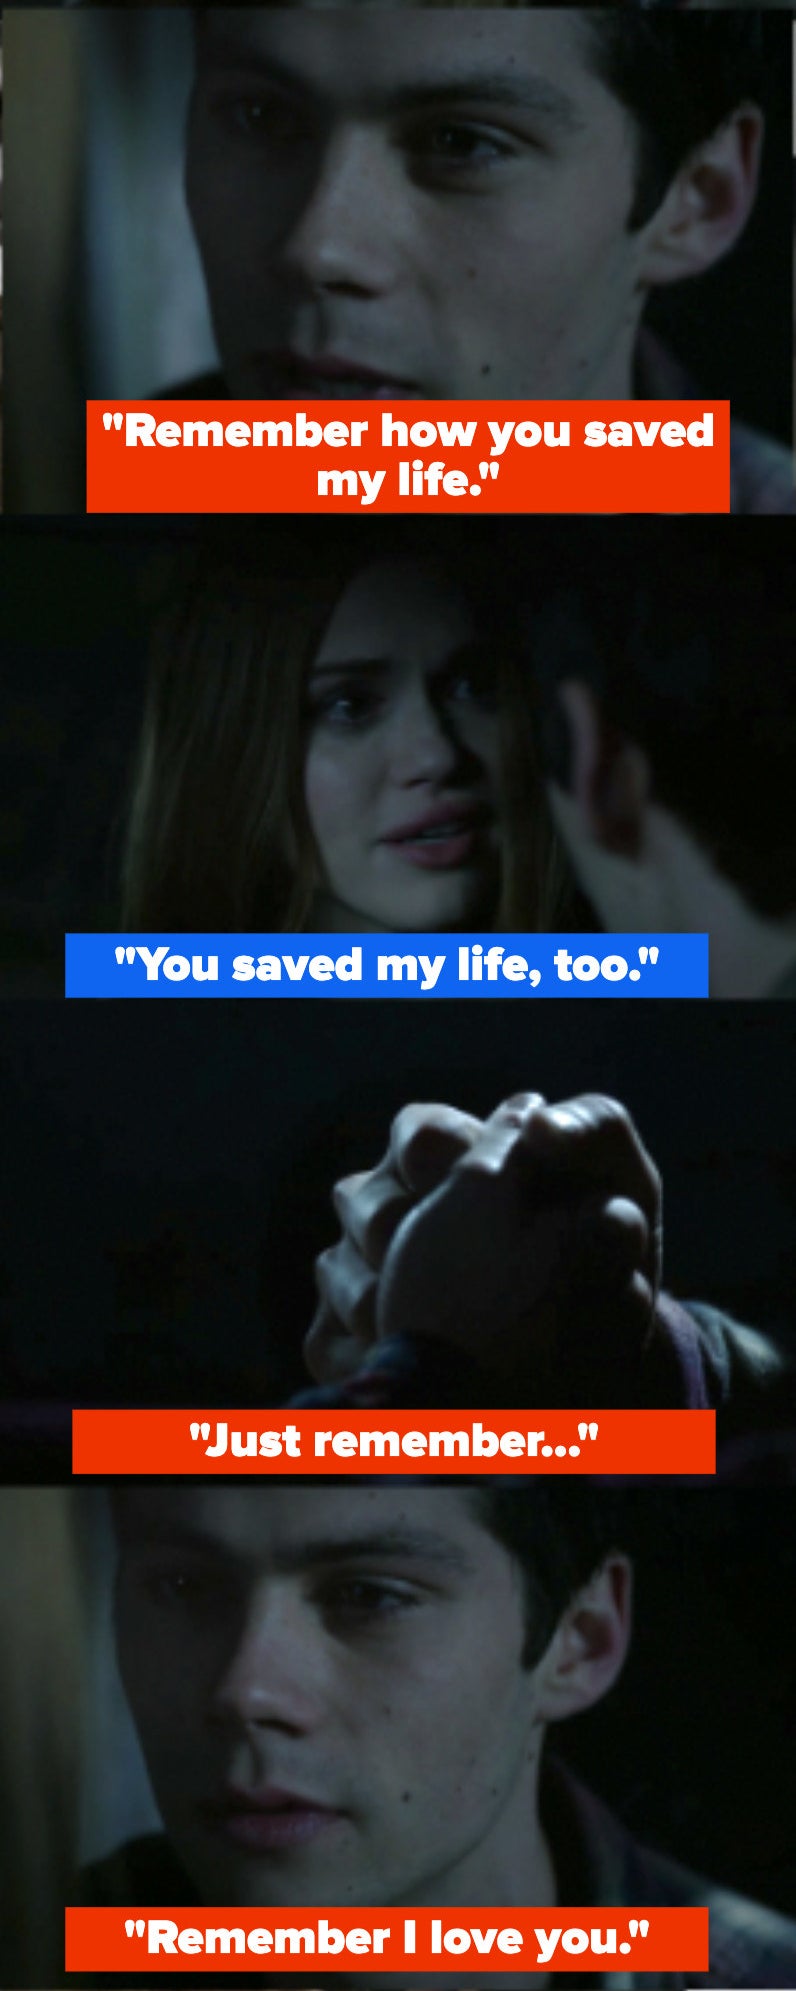 Stiles asks Lydia to find some way to remember him. That they danced together, that he had a crush on her, that she saved his life. She says he saved hers too. Then Stiles says, &quot;Remember I love you&quot;